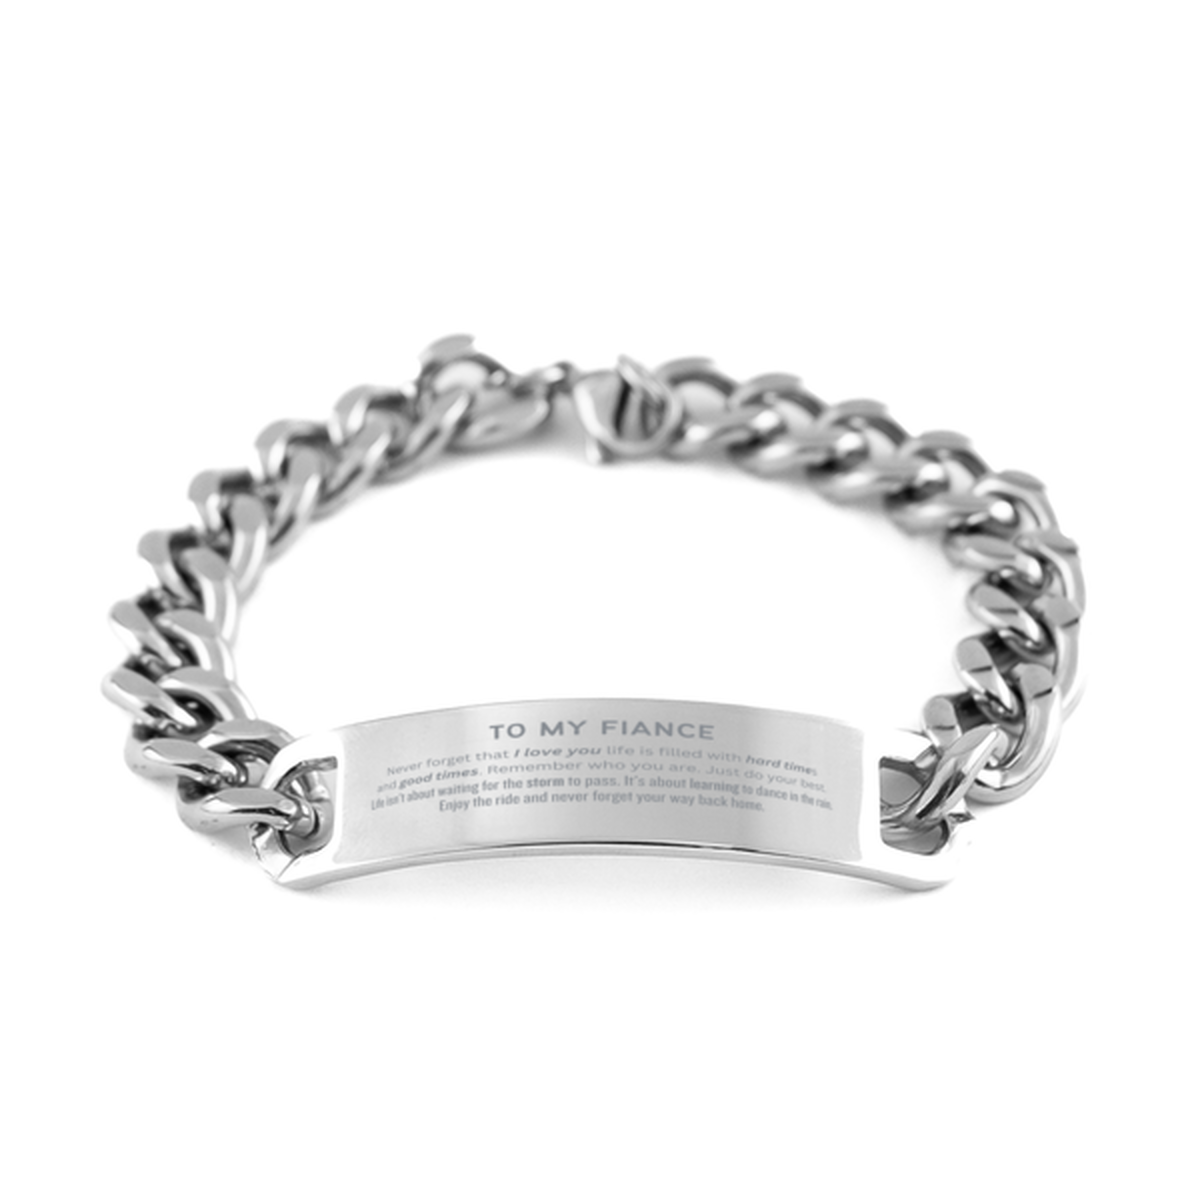 Christmas Fiance Cuban Chain Stainless Steel Bracelet Gifts, To My Fiance Birthday Thank You Gifts For Fiance, Graduation Unique Gifts For Fiance To My Fiance Never forget that I love you life is filled with hard times and good times. Remember who you are